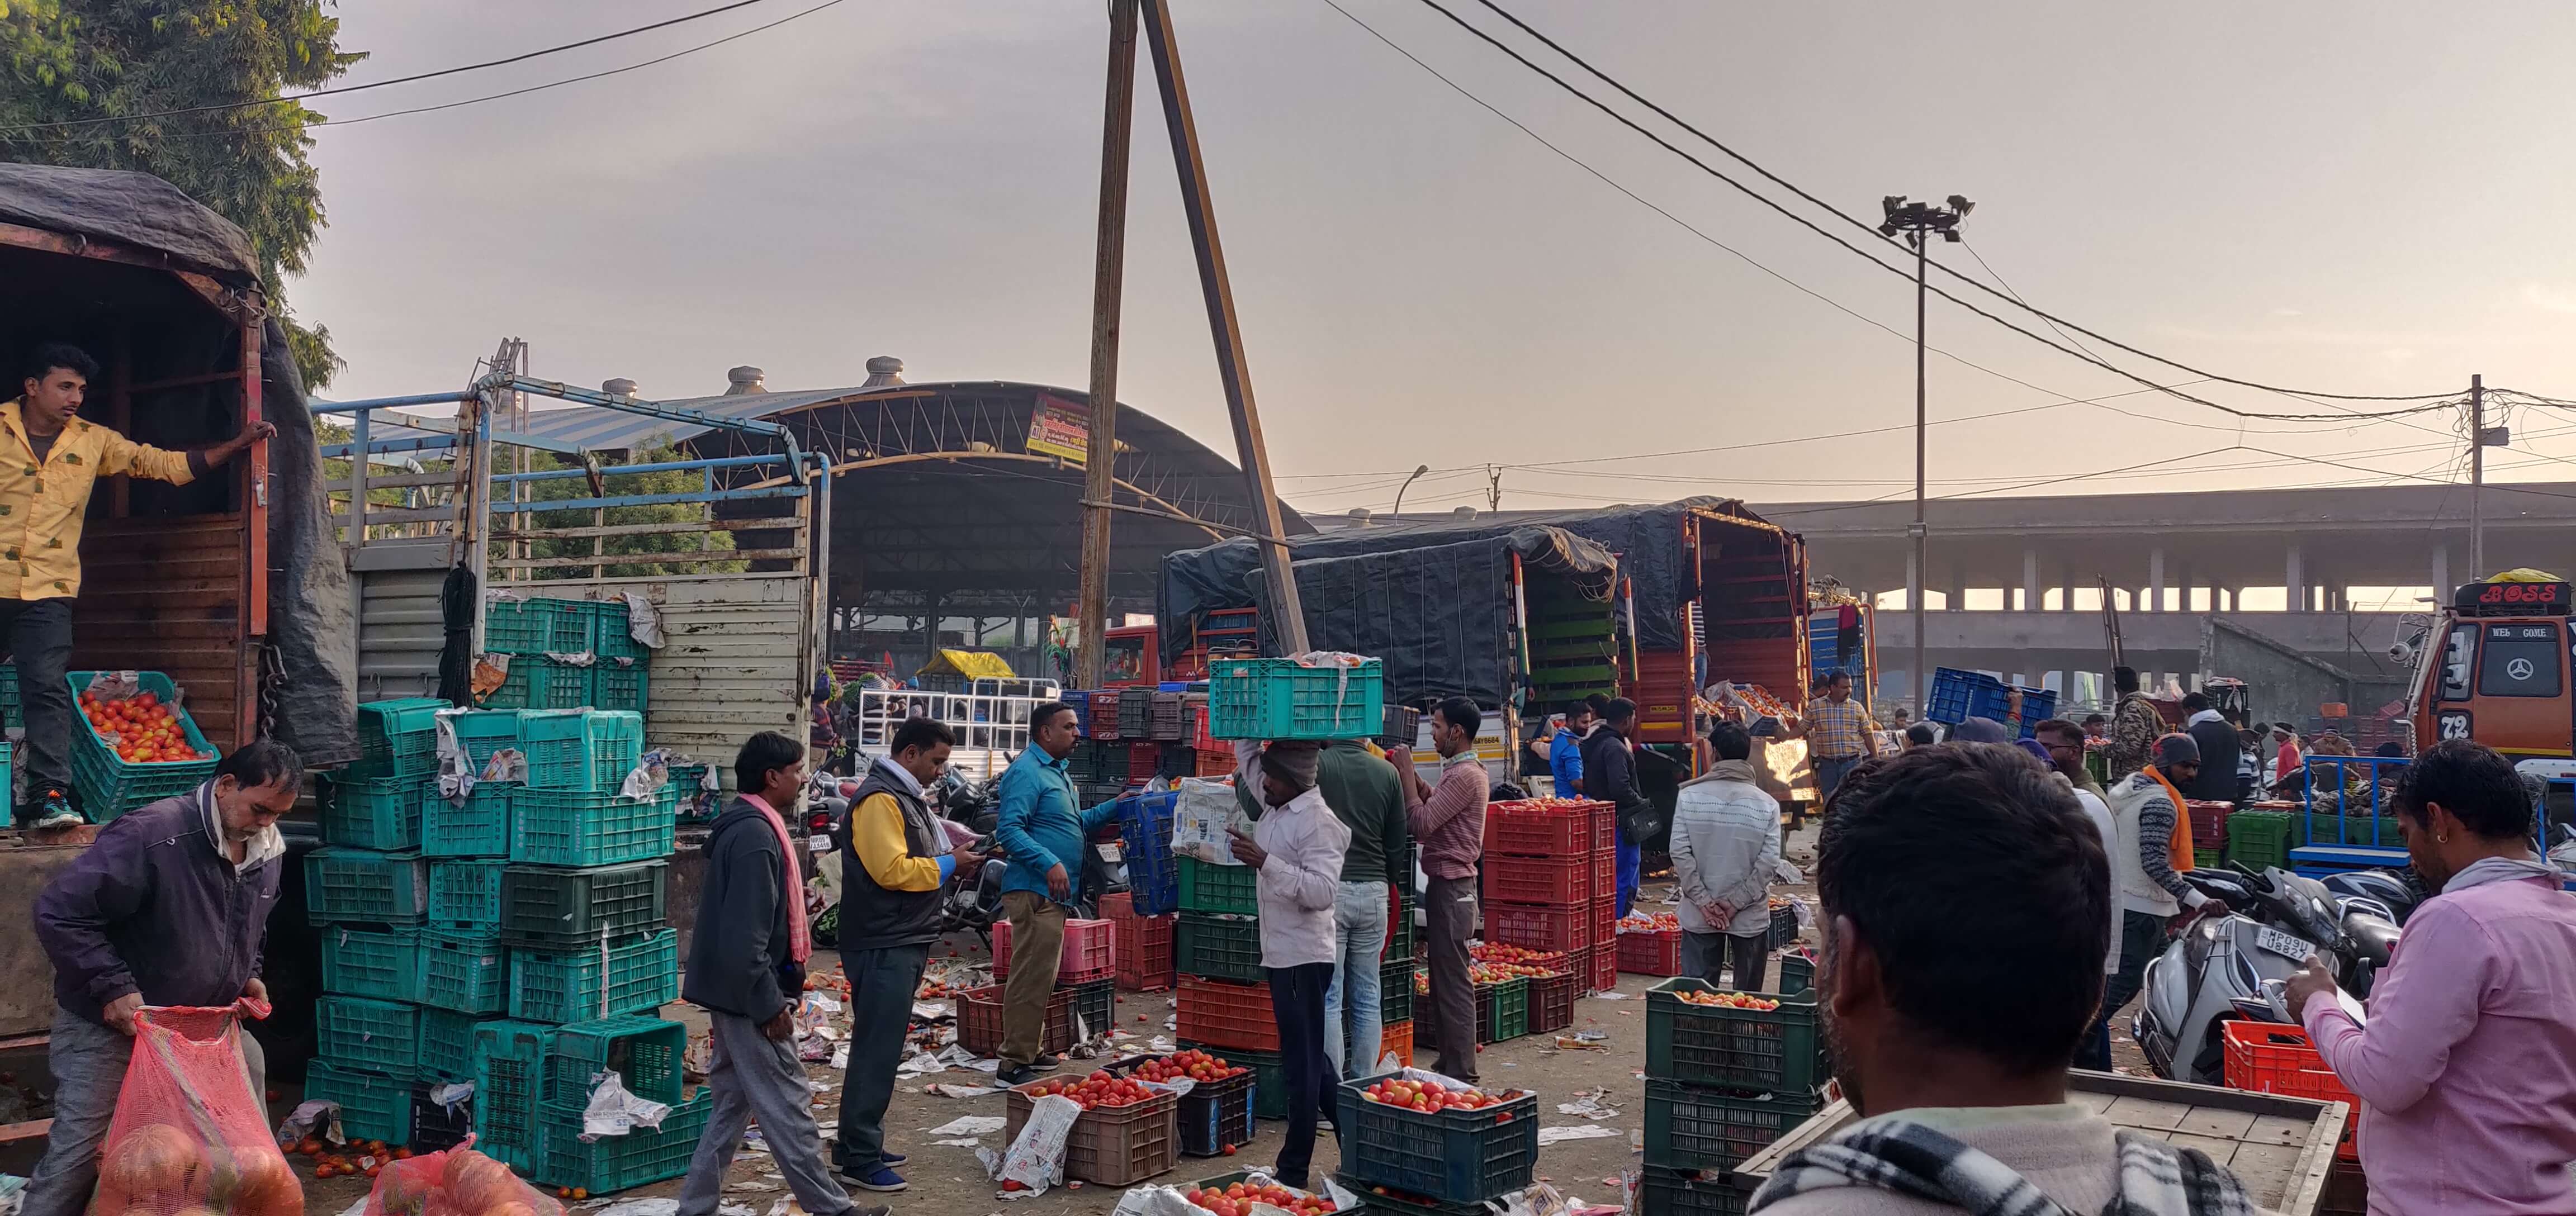 Trading in wholesale mandis begins in early morning hours; scene from a mandi in Indore.